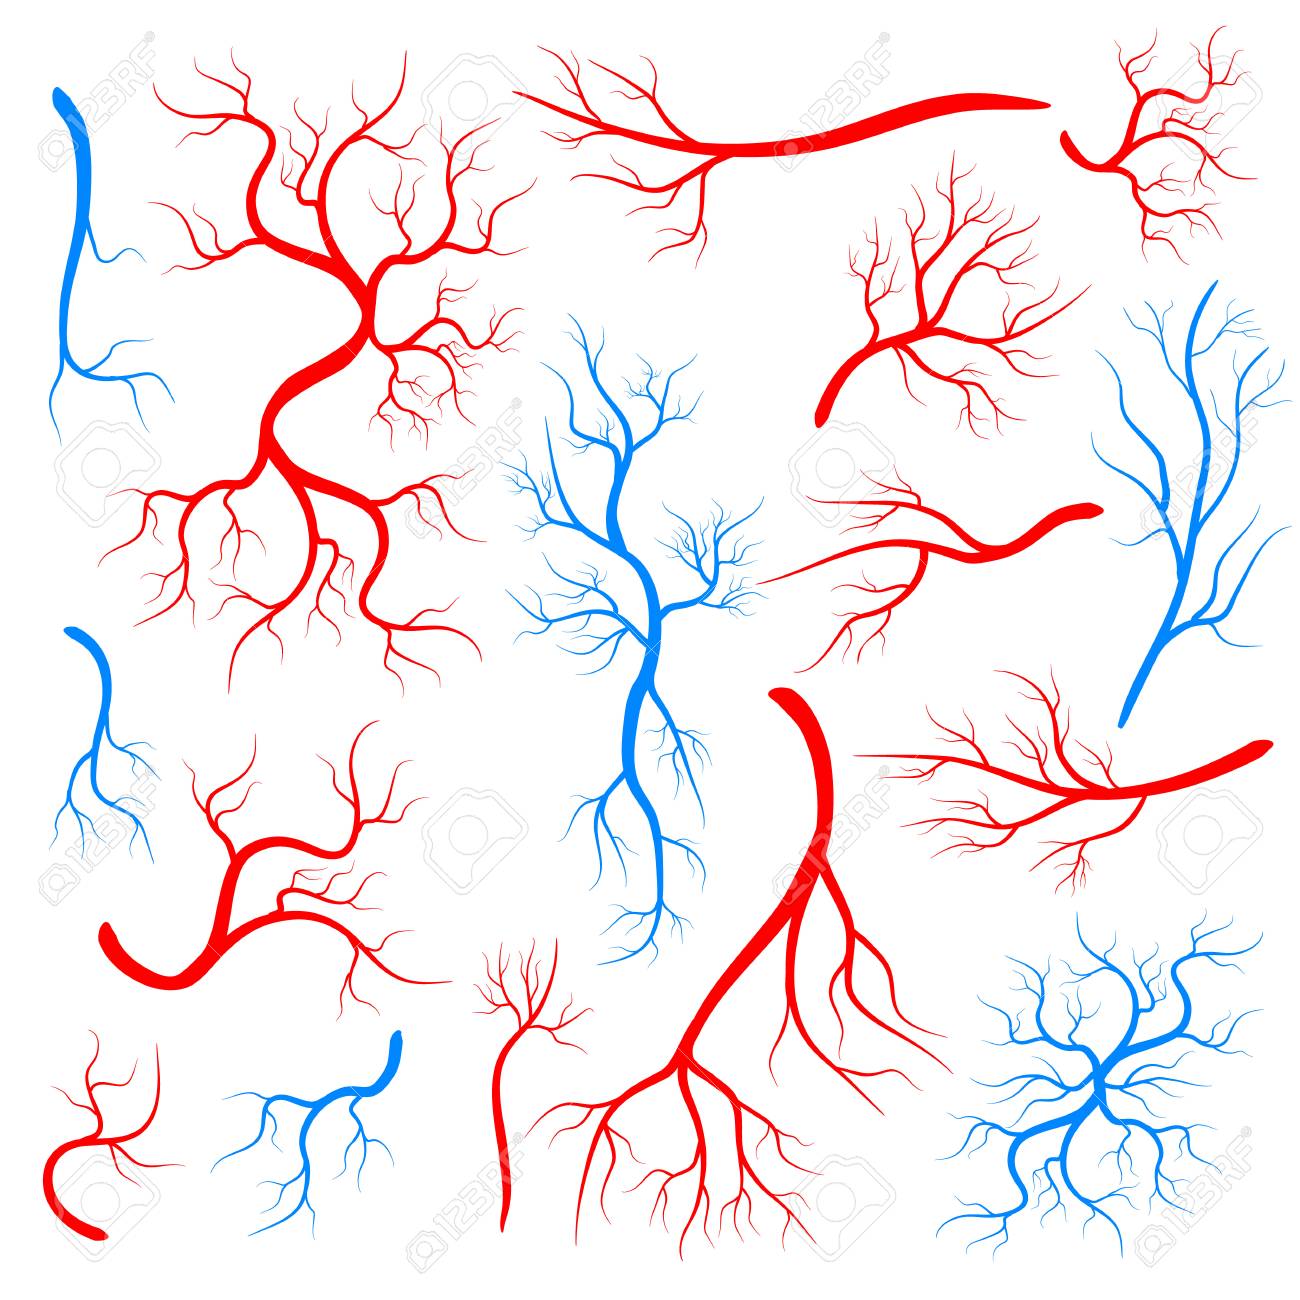 Creative Vector Illustration Of Red Veins Isolated On Background